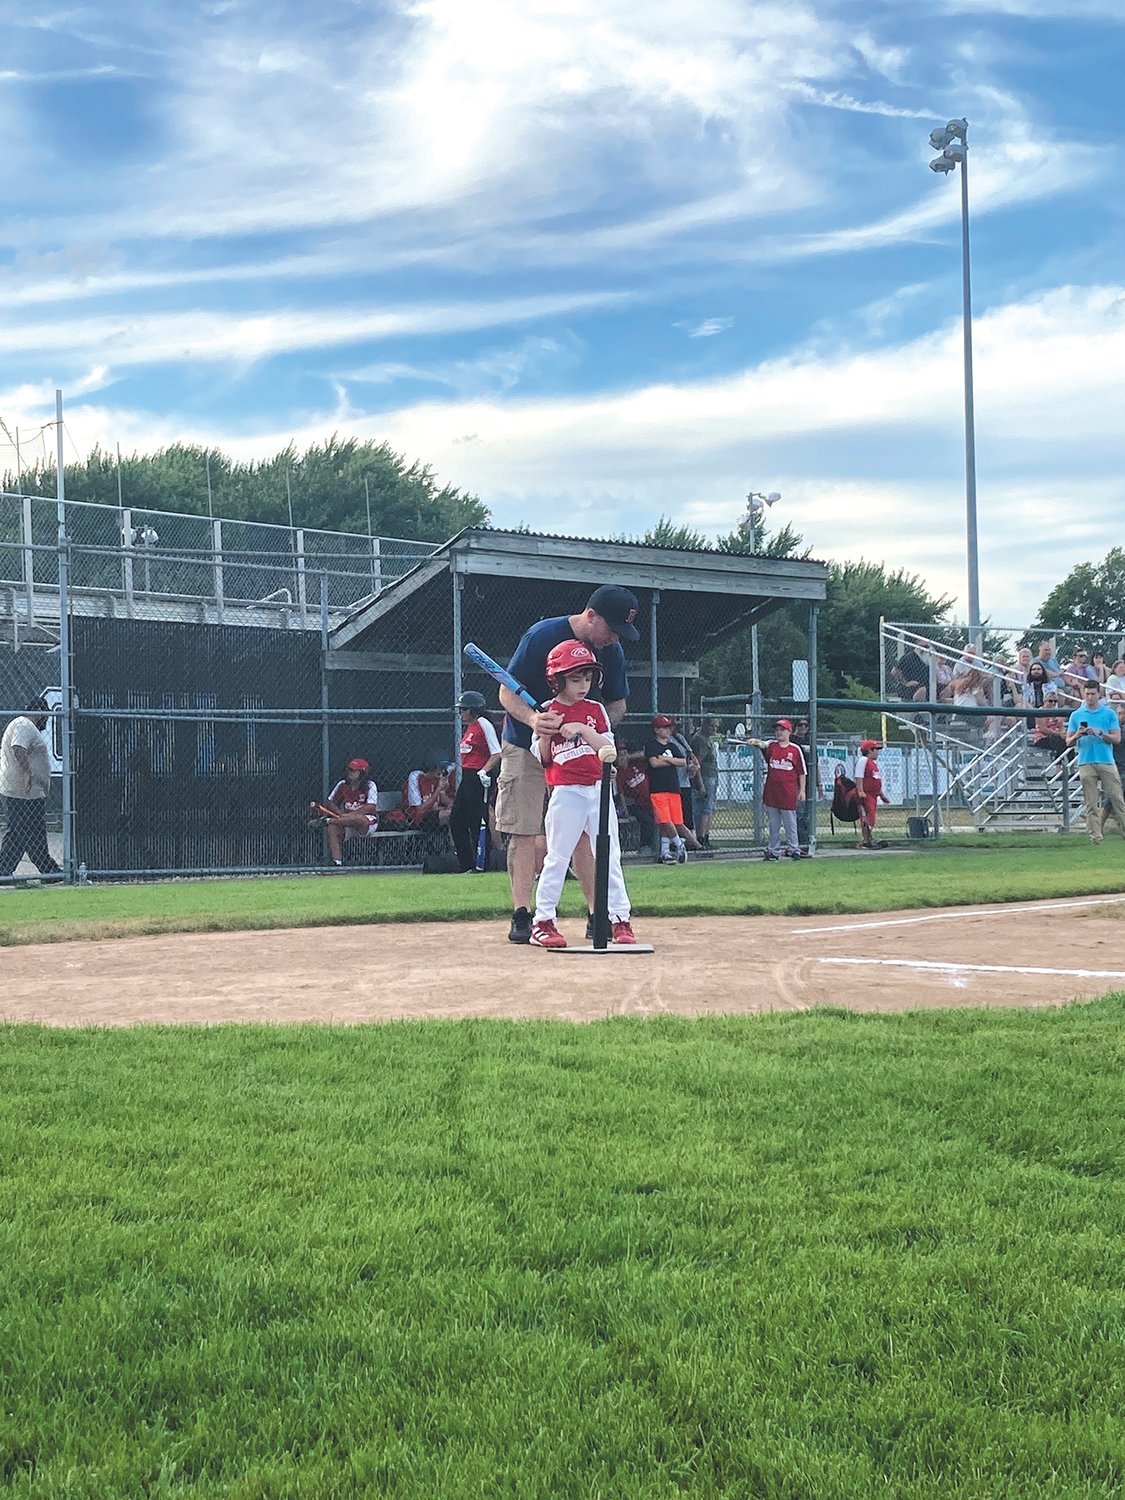 GET READY TO SWING: Players can have buddies – including teammates, family members, friends and other players in Cranston West Little League – to help them bat, run and catch balls. (Herald photo)